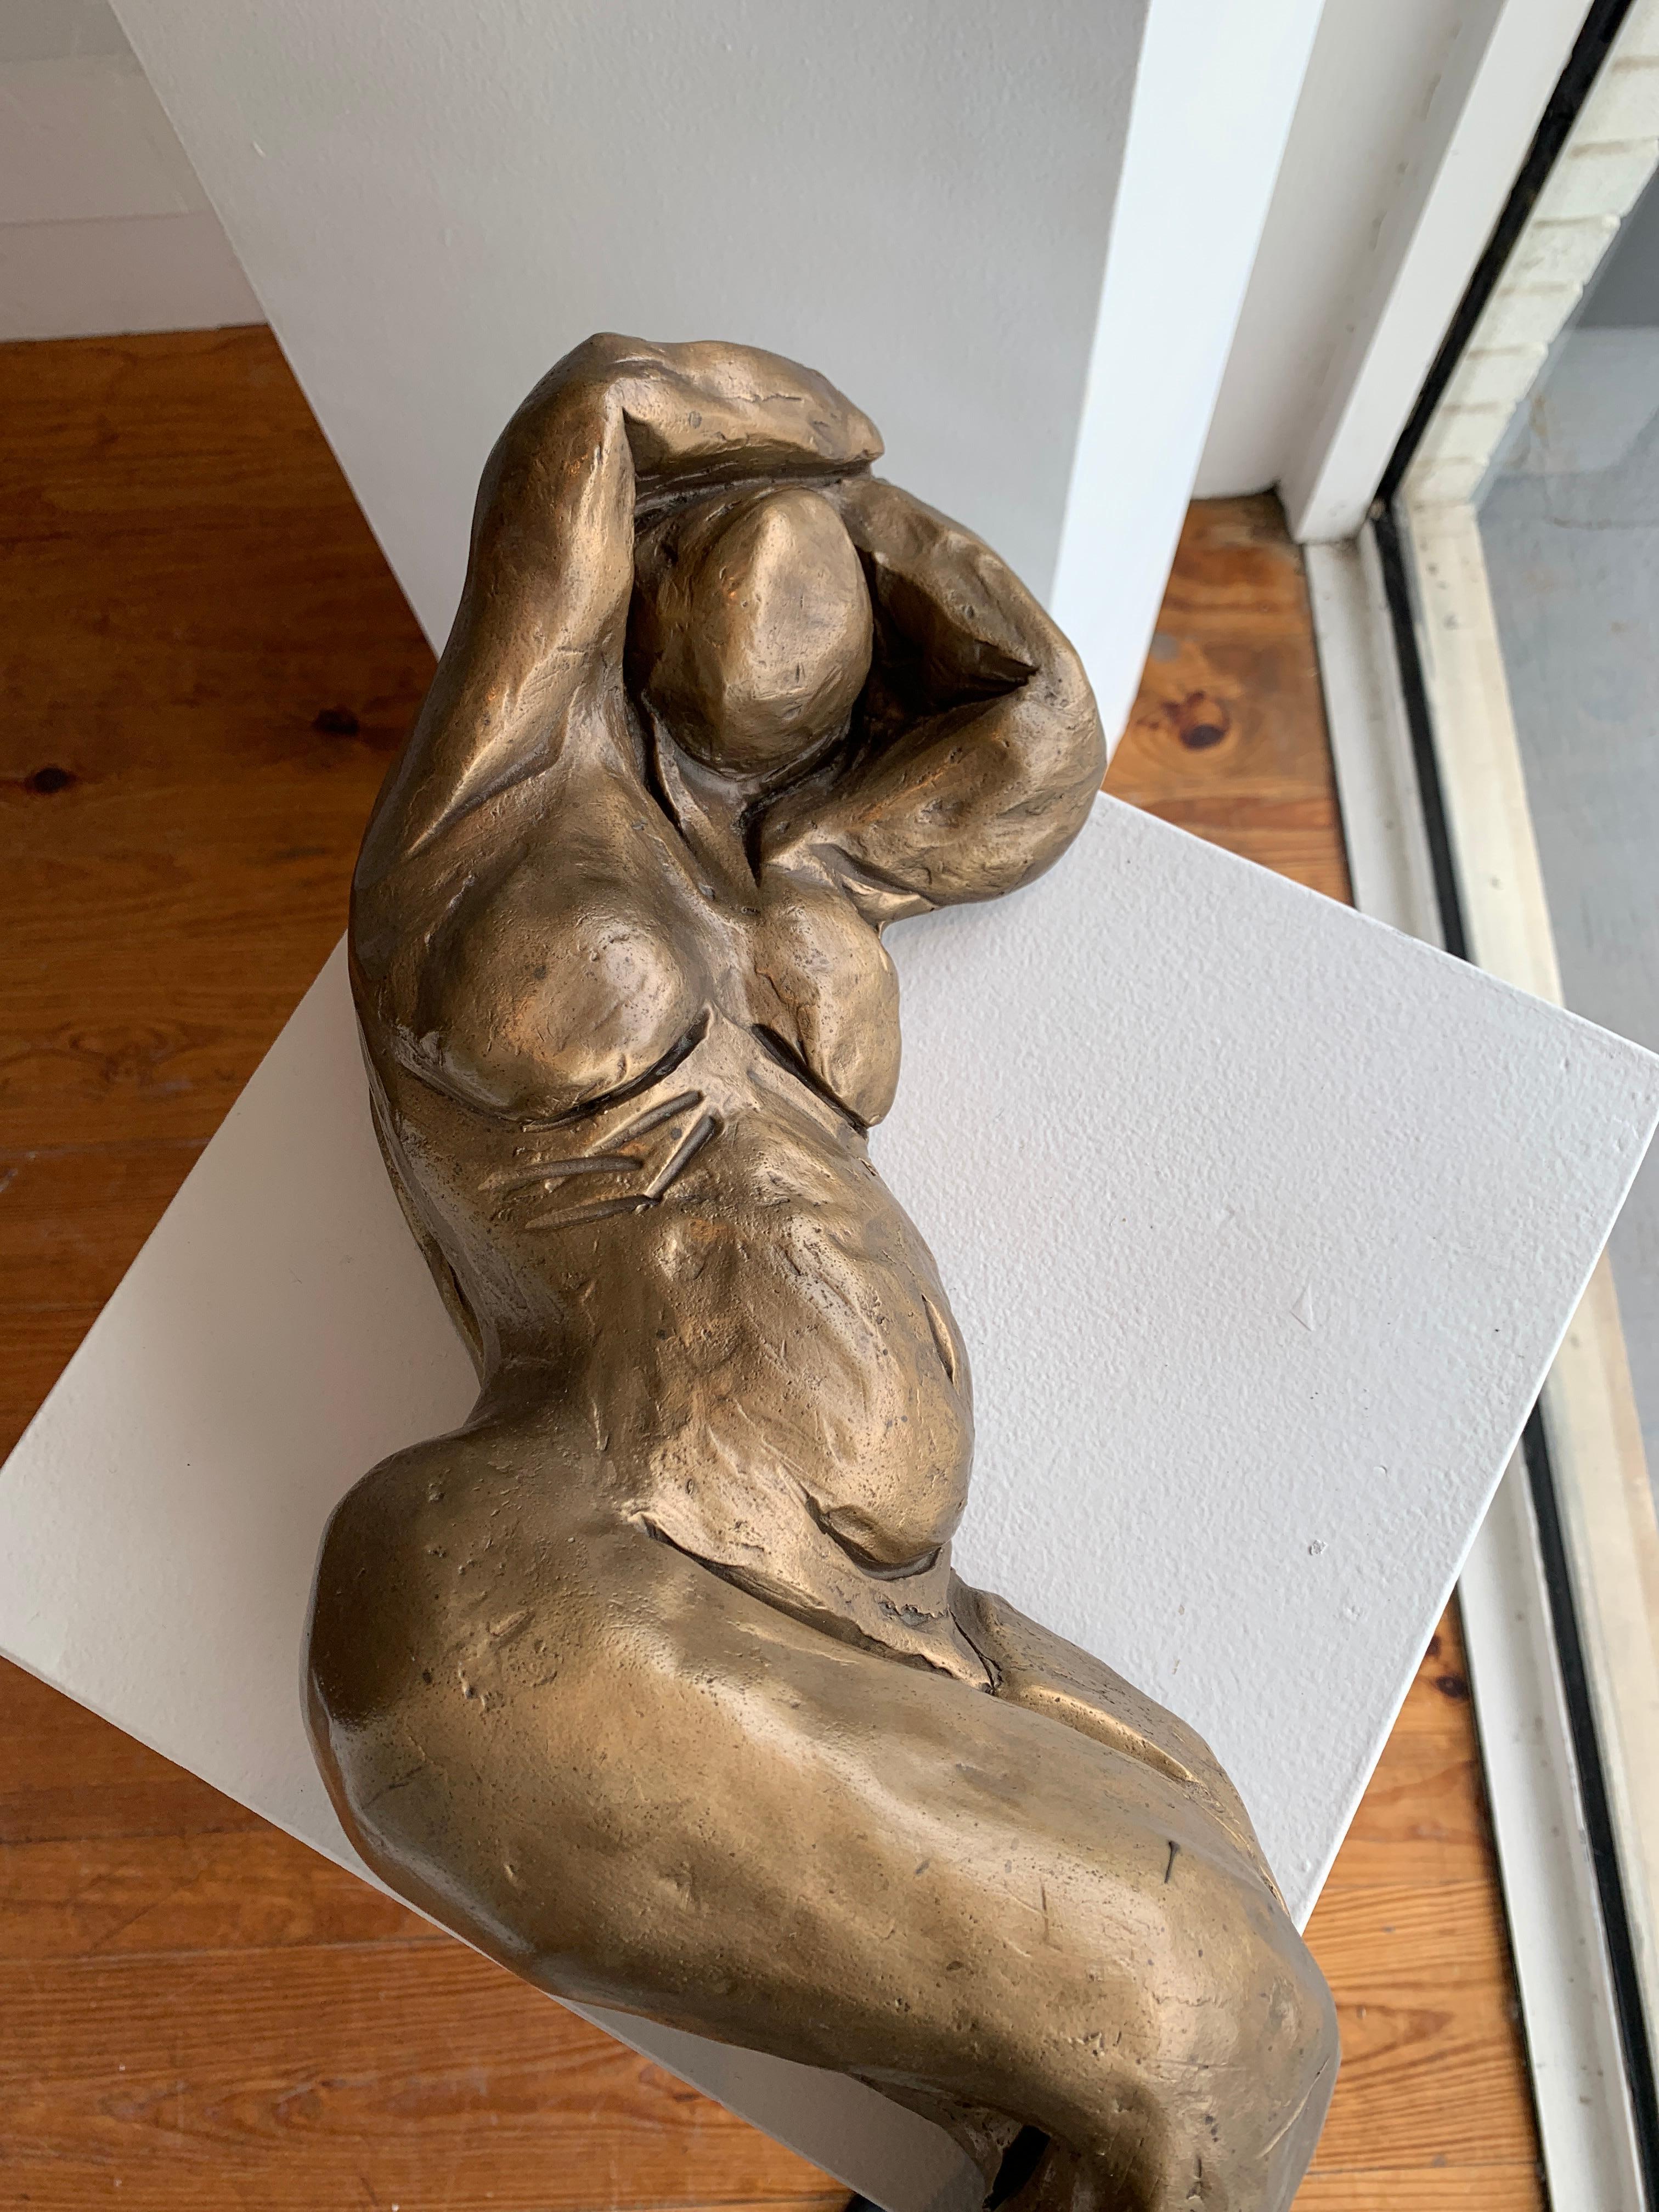 Layla Tov - Gold Nude Sculpture by Aleta Aaron